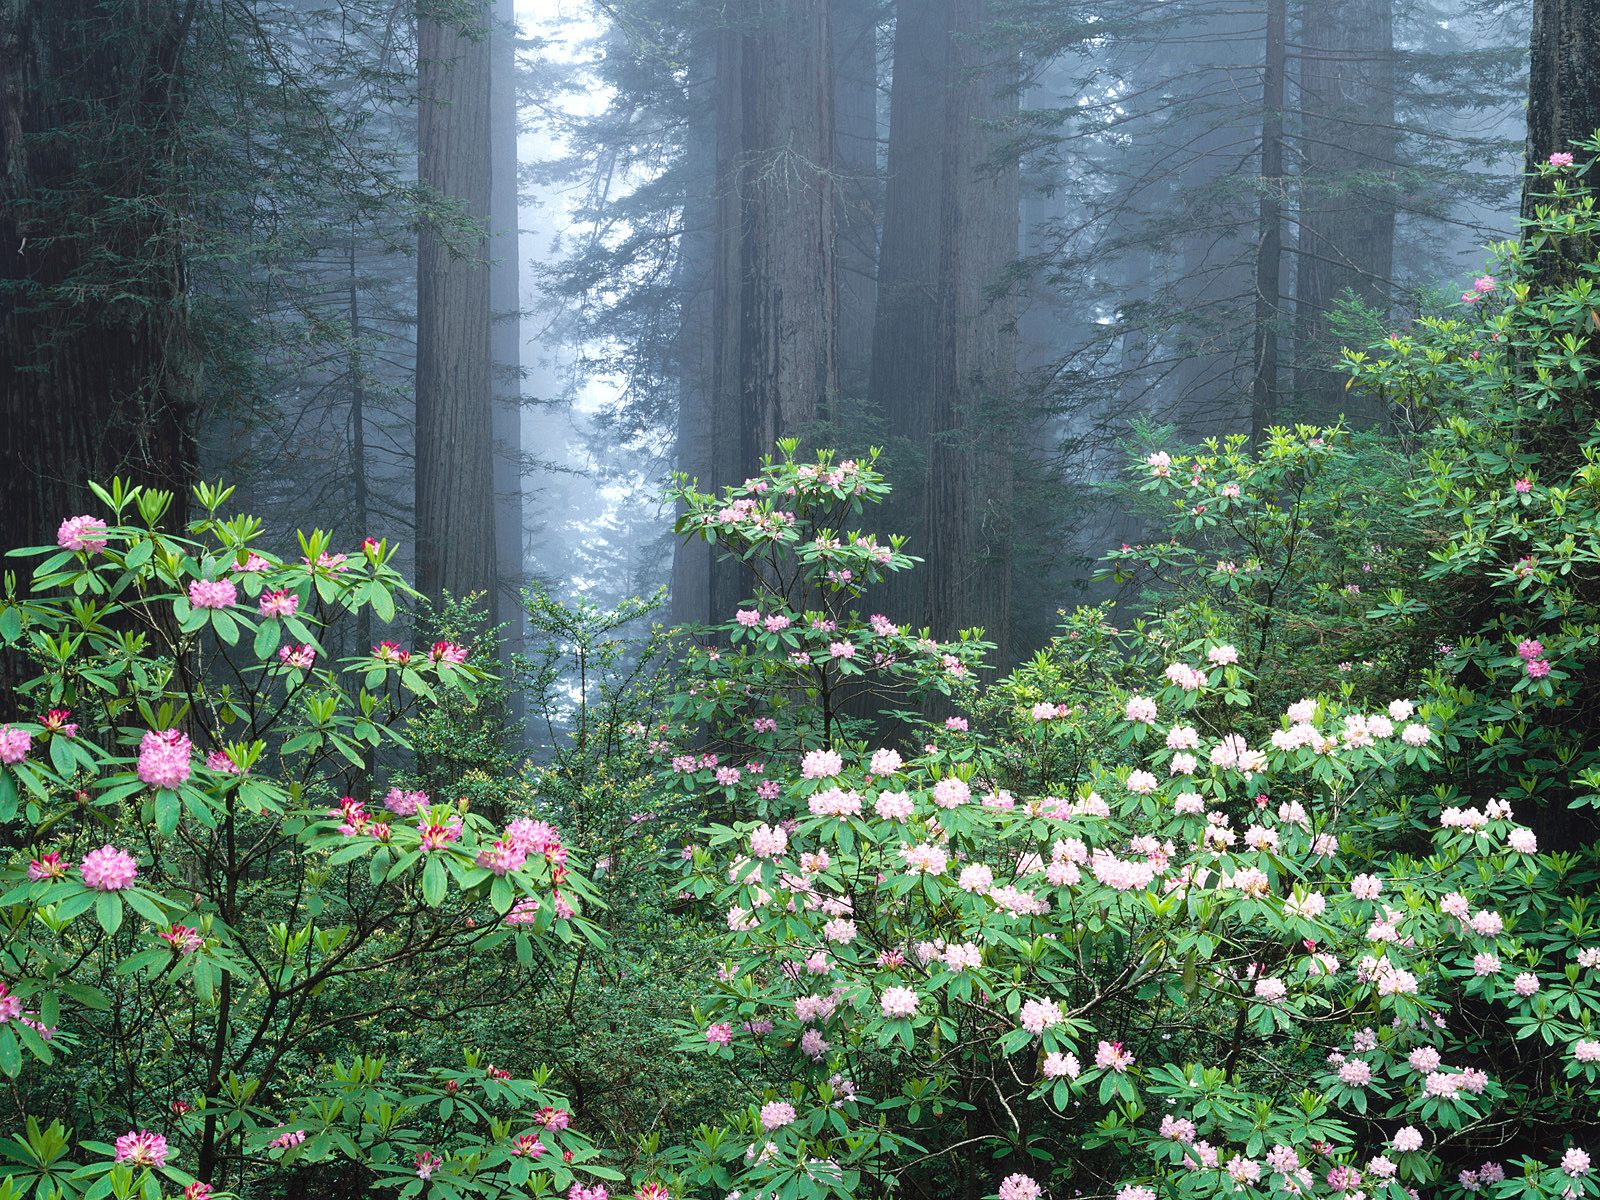 Redwoods and Blooming Rhododendrons, California